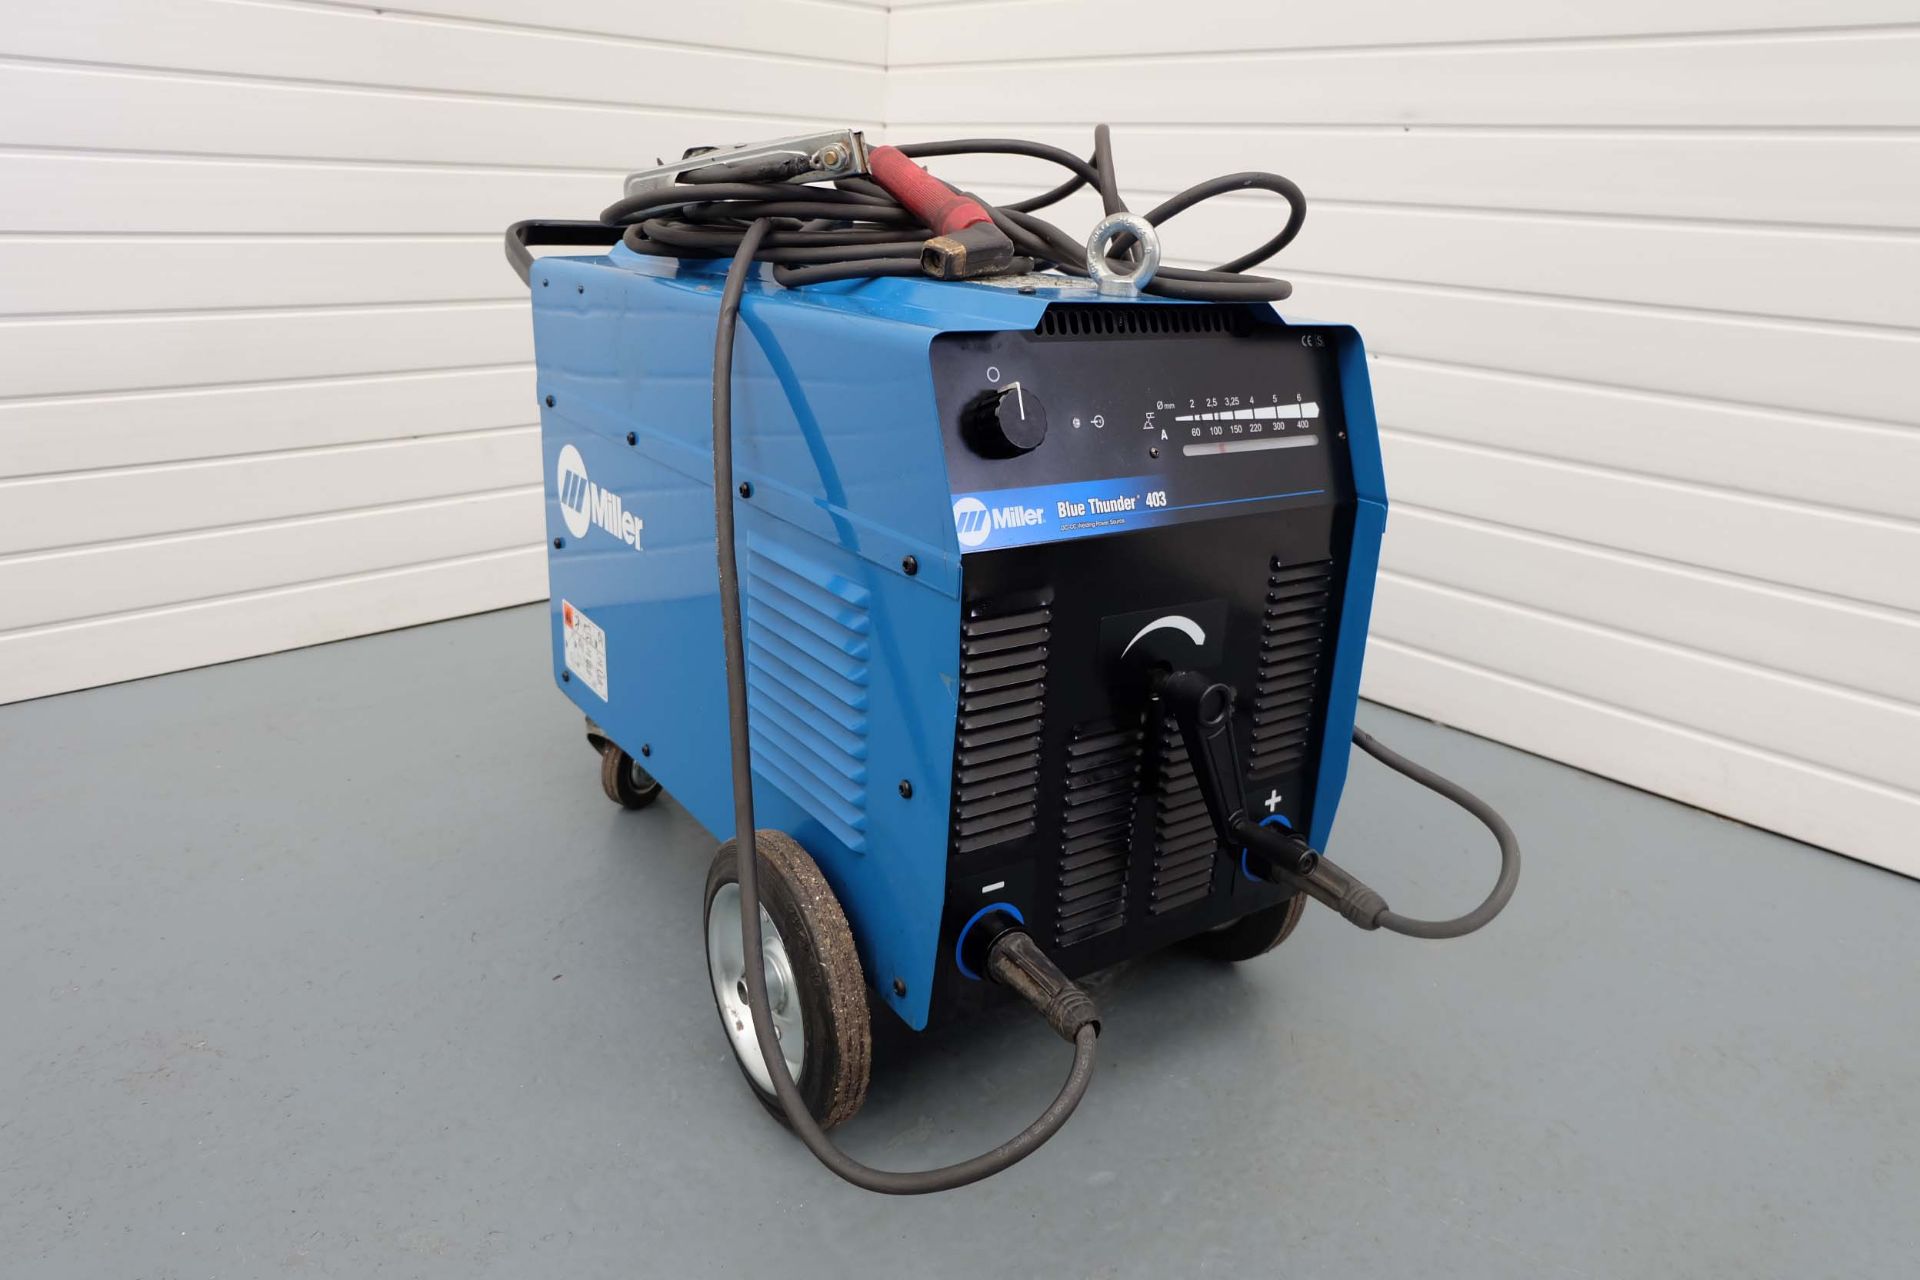 Miller Blue Thunder 403 DC-CC Welding Power Source On Wheels With Torch.